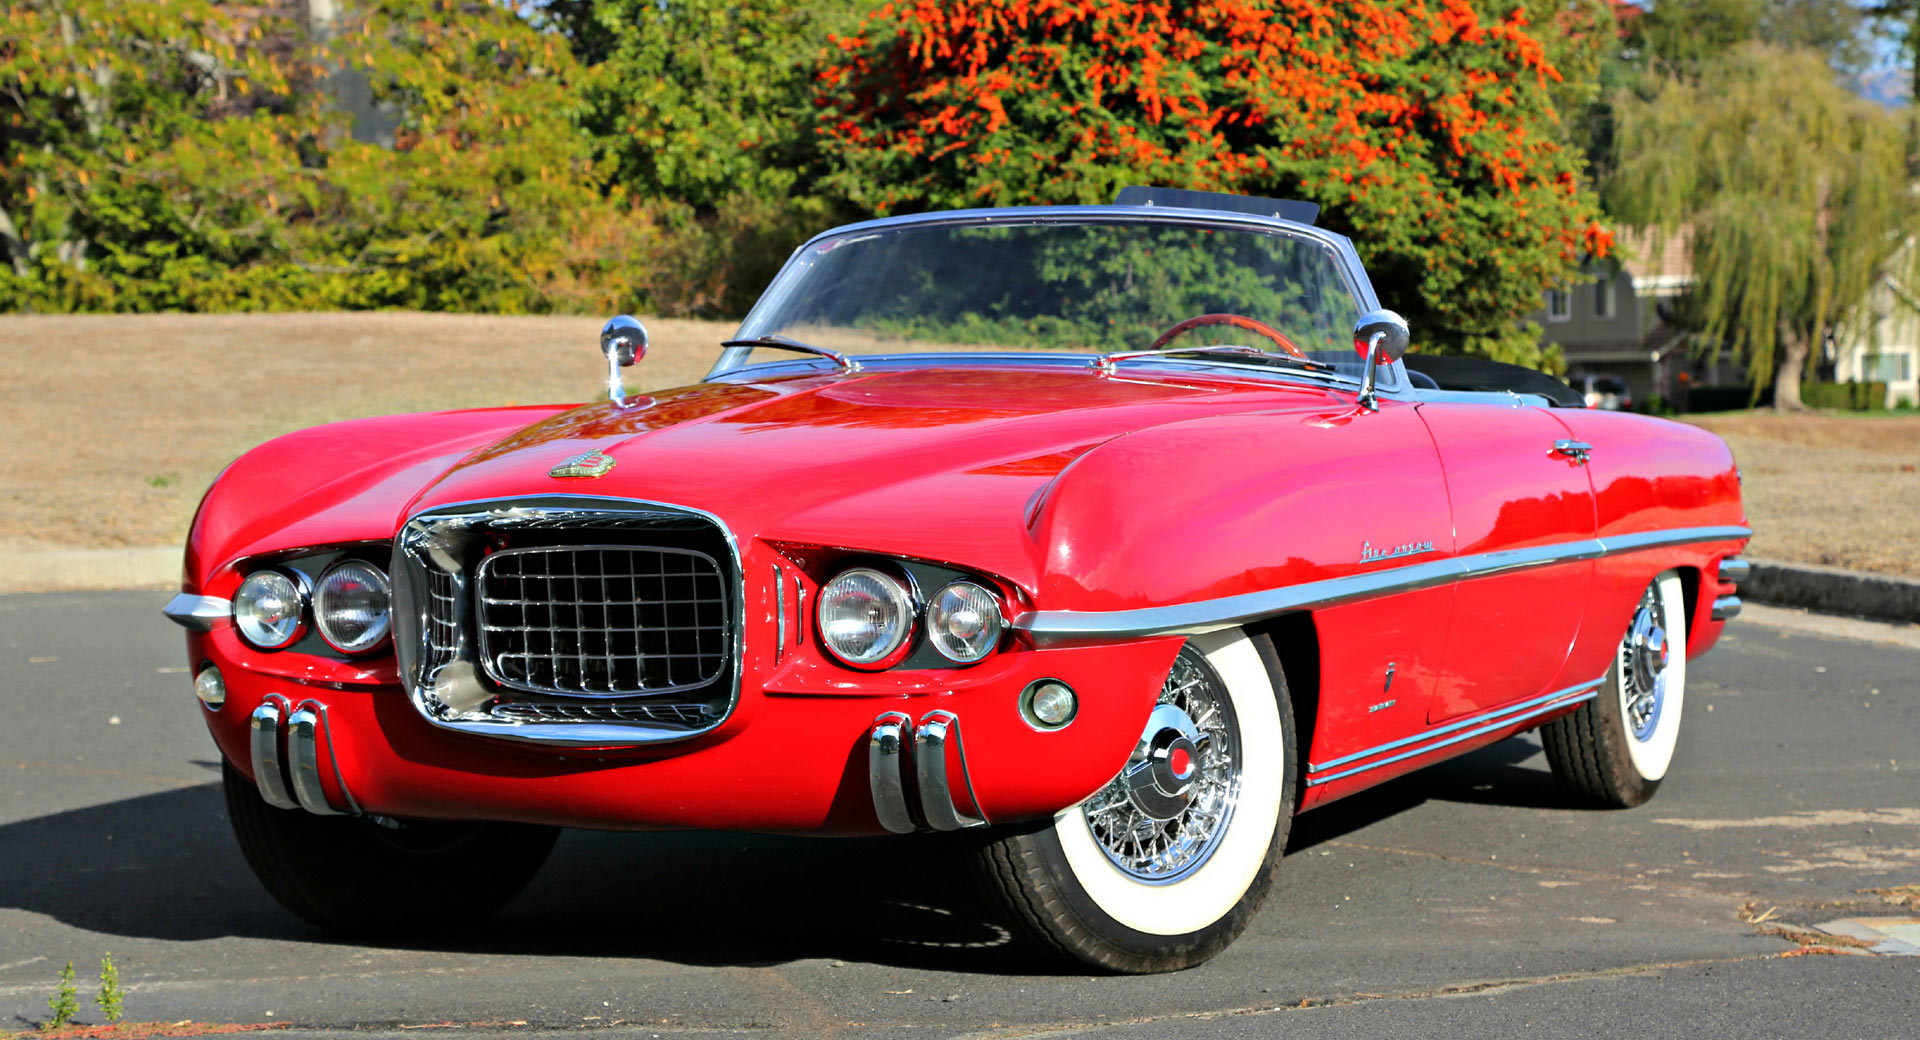 The 10 Best Luxury Cars of the 1950s